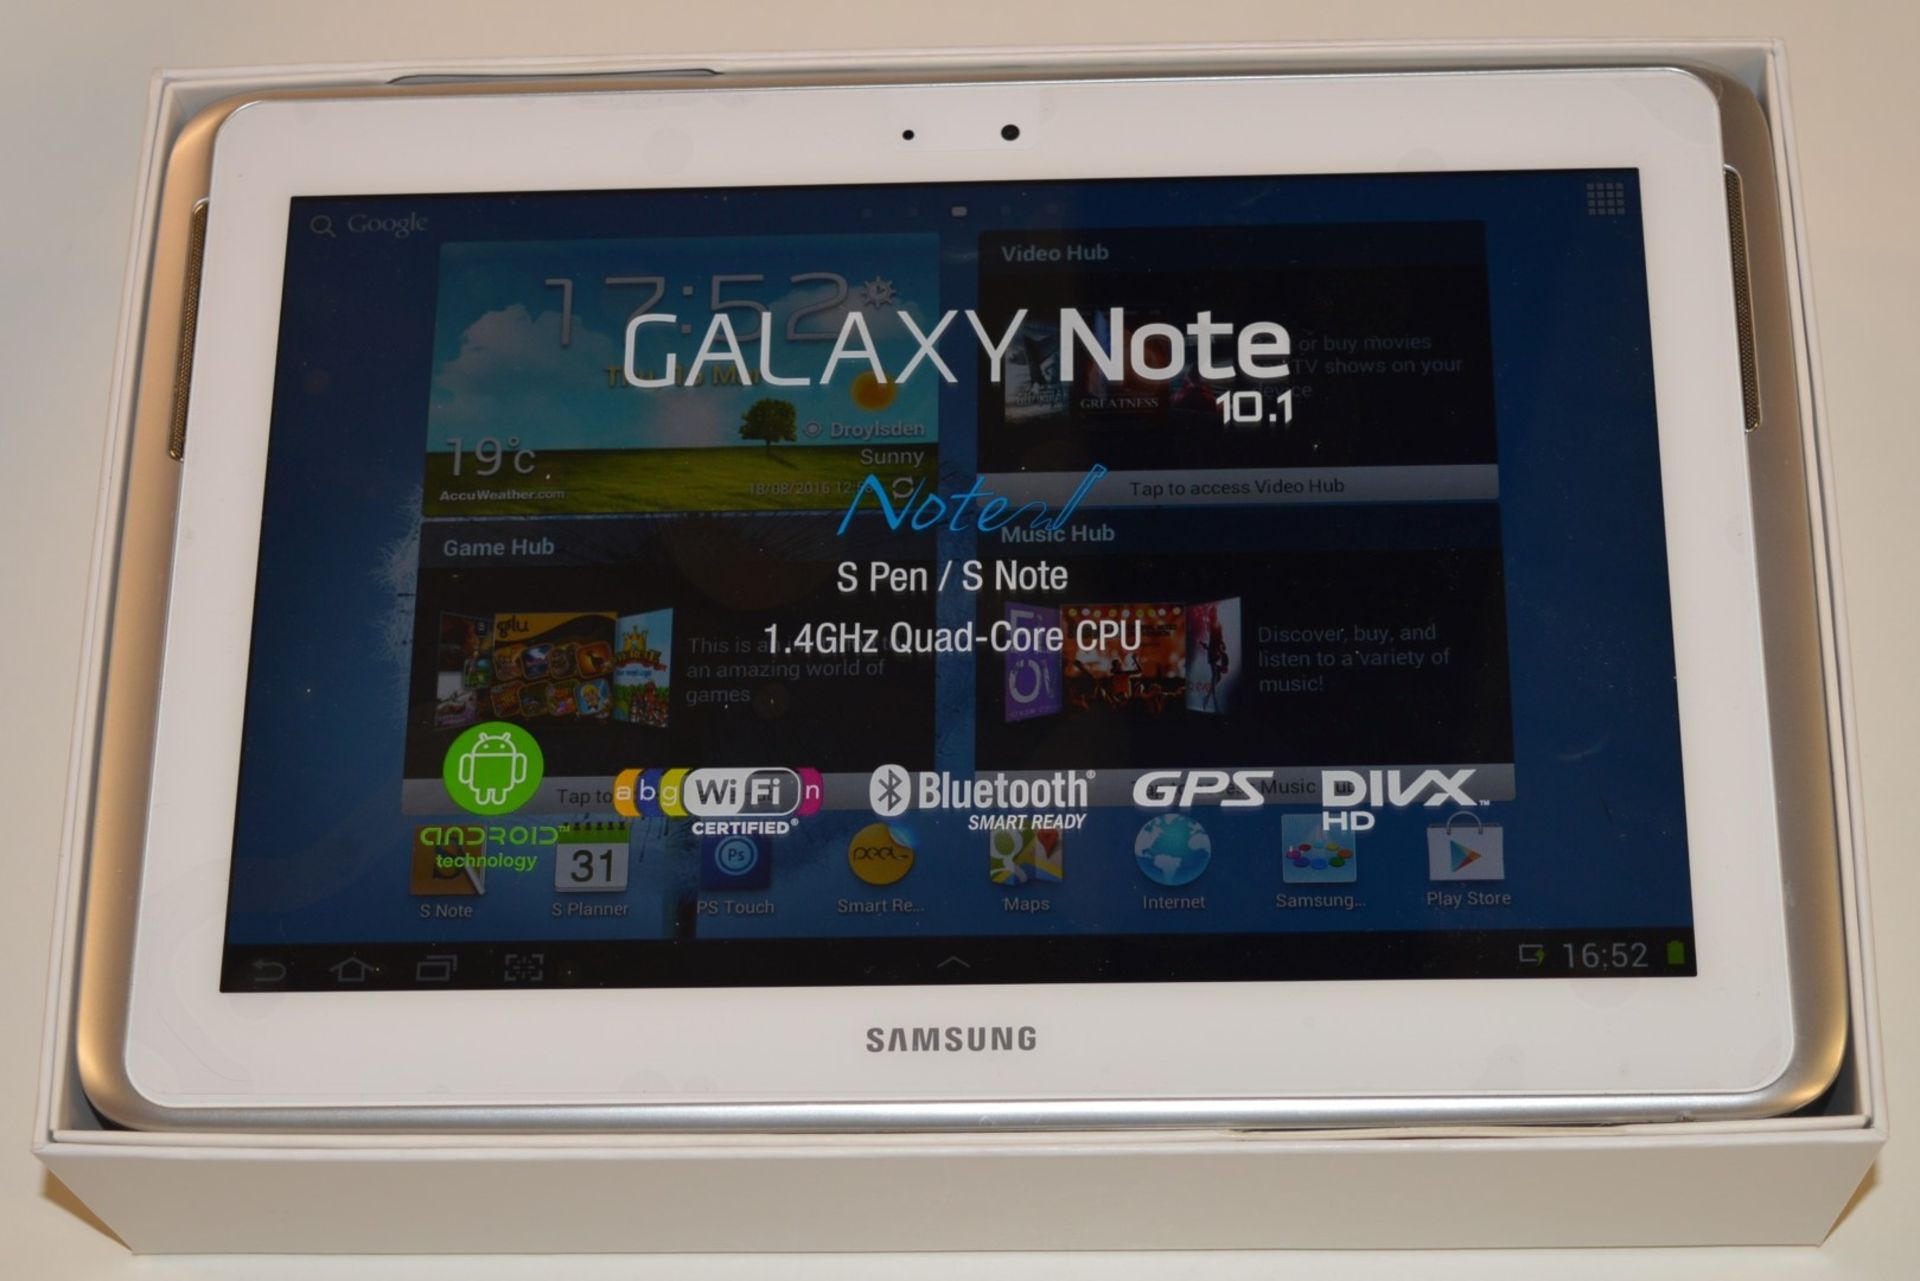 1 x Samsung Galaxy Note 10.1 Tablet Computer - Features Quad Core 1.4ghz Processor, 2gb Ram, 16gb - Image 2 of 10